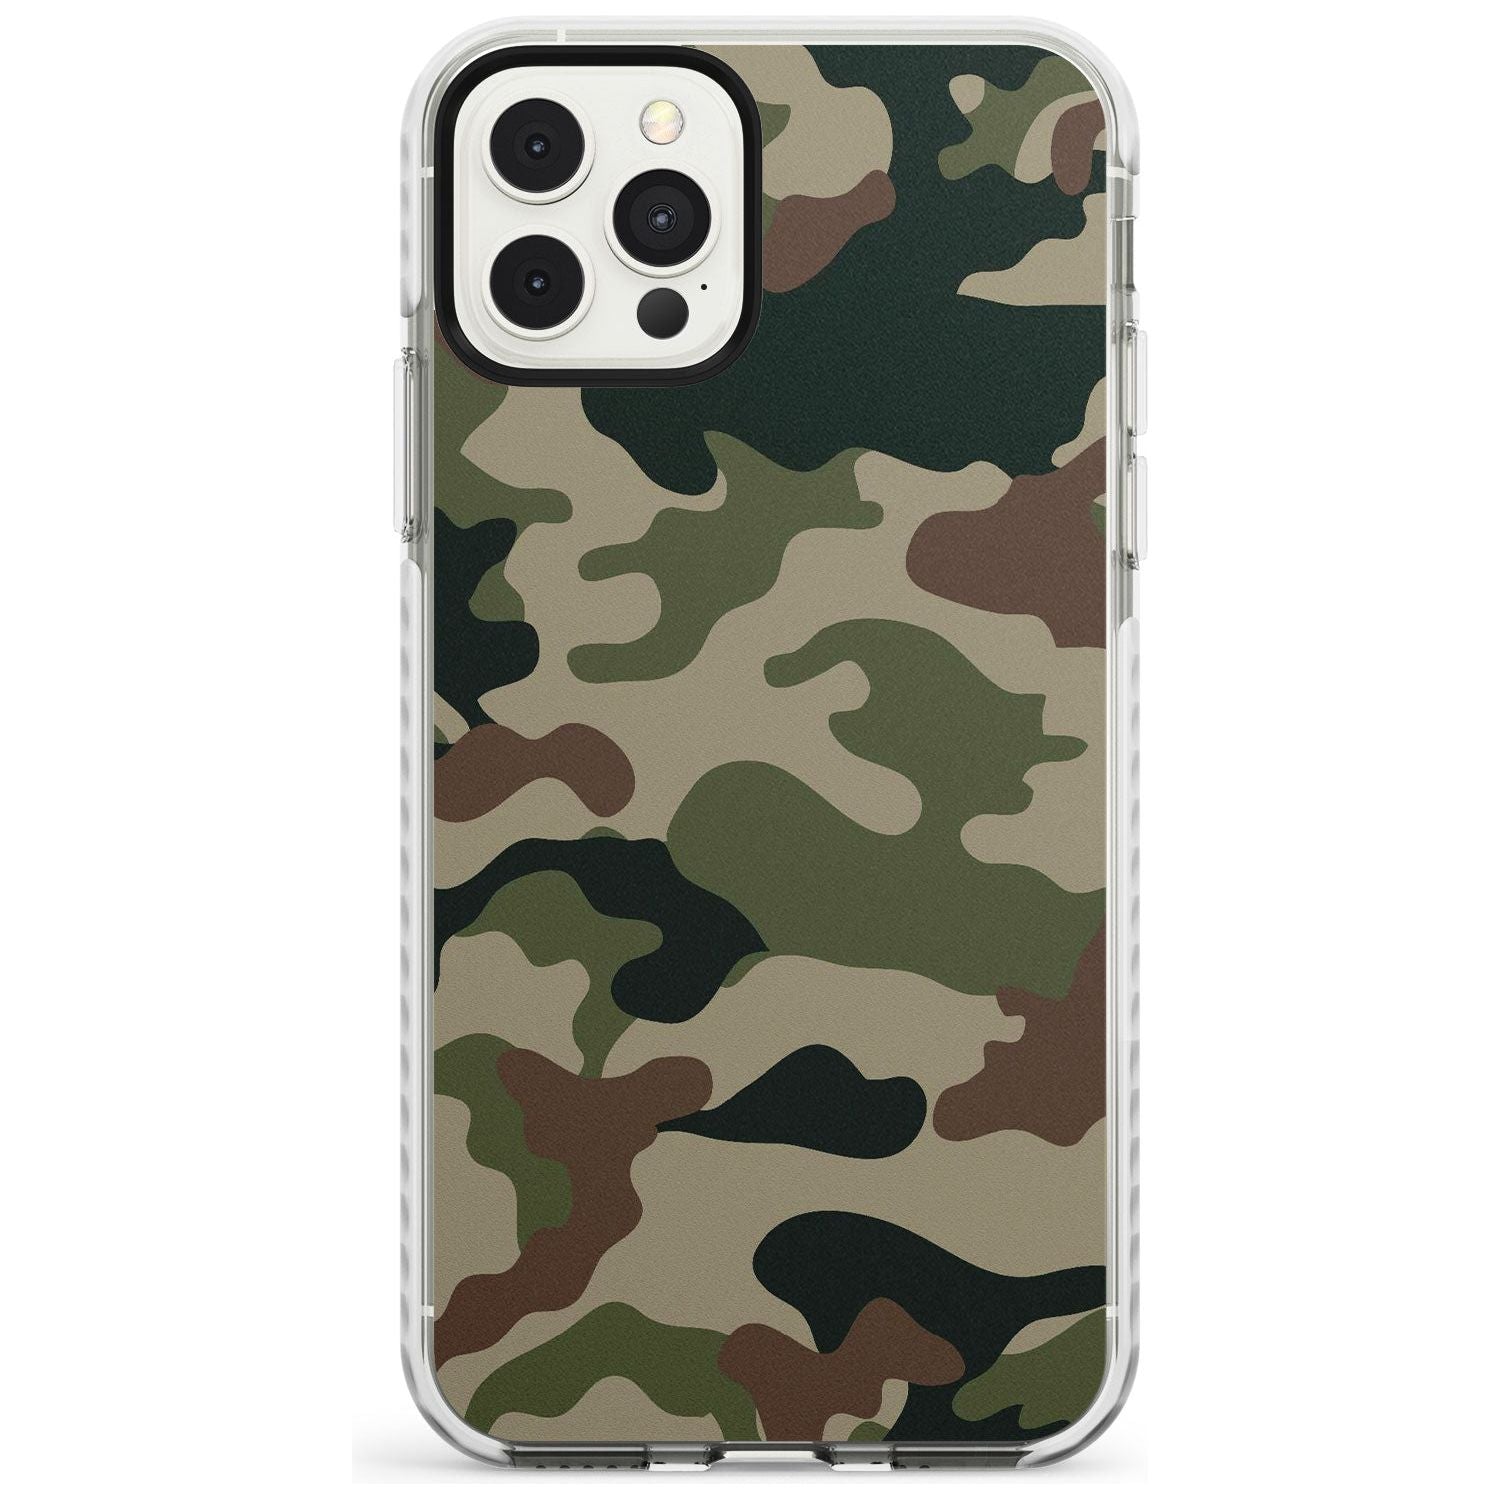 Green and Brown Camo Impact Phone Case for iPhone 11 Pro Max